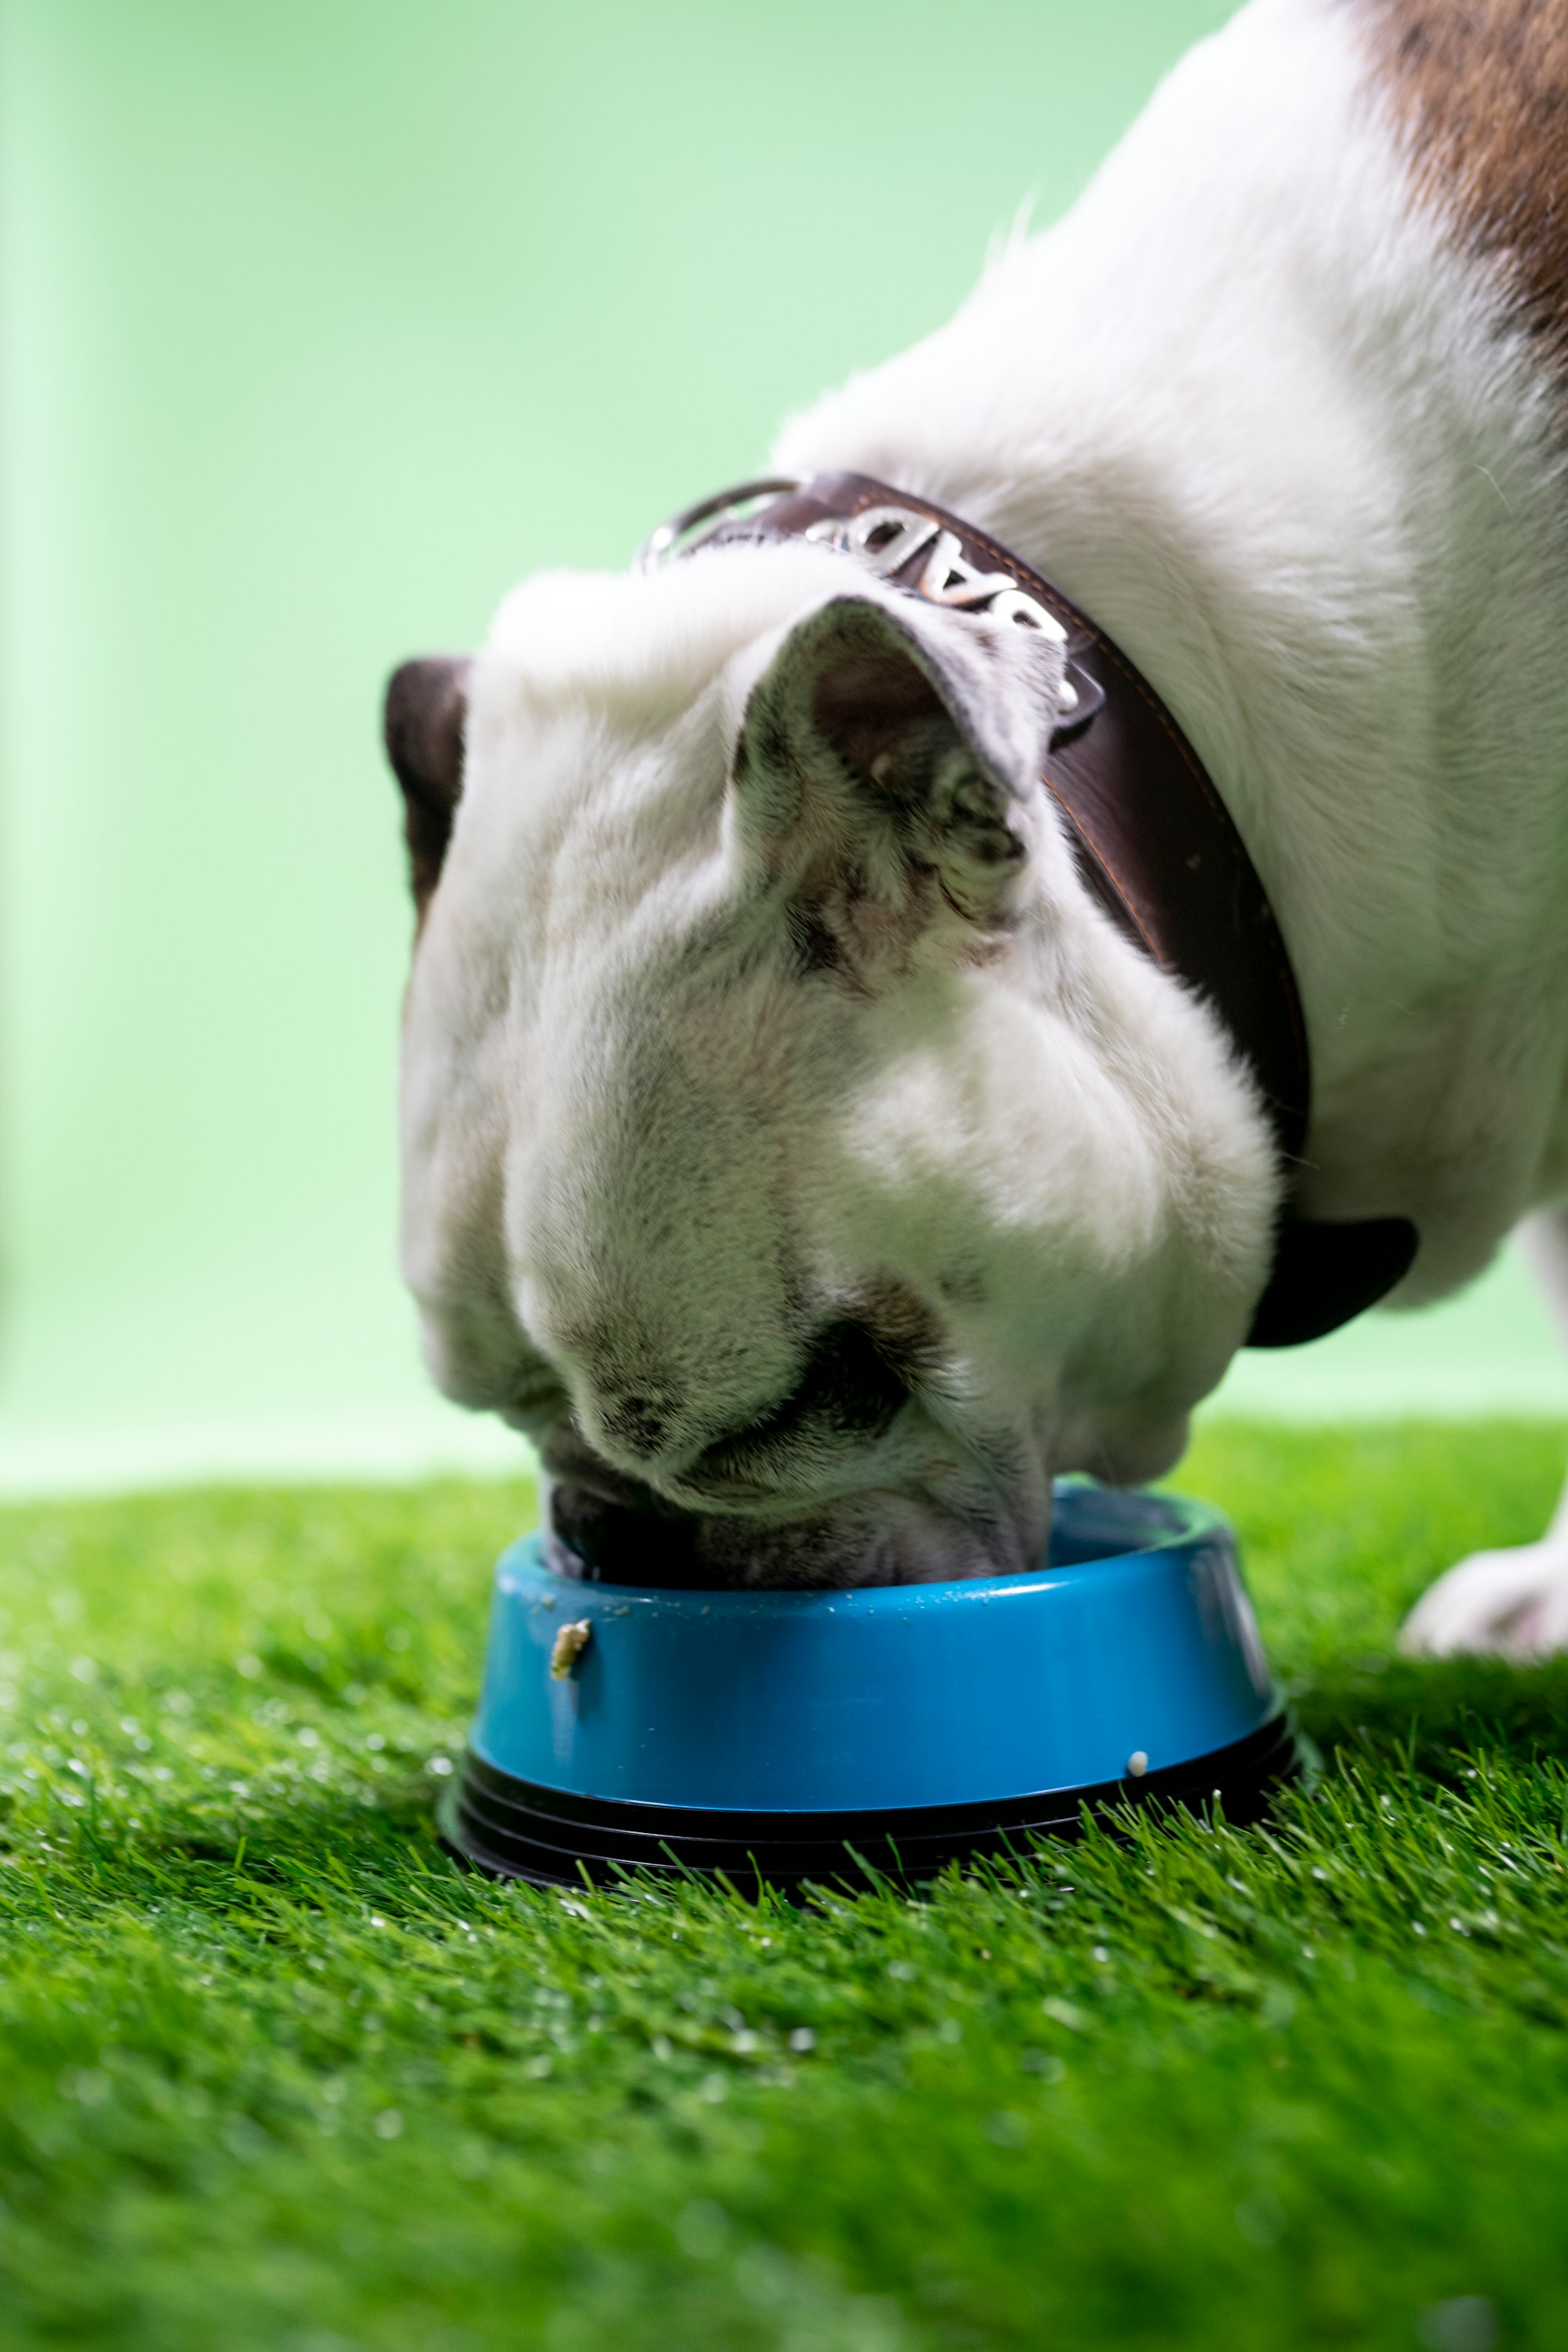 Introducing new diet to your dog: A Guide